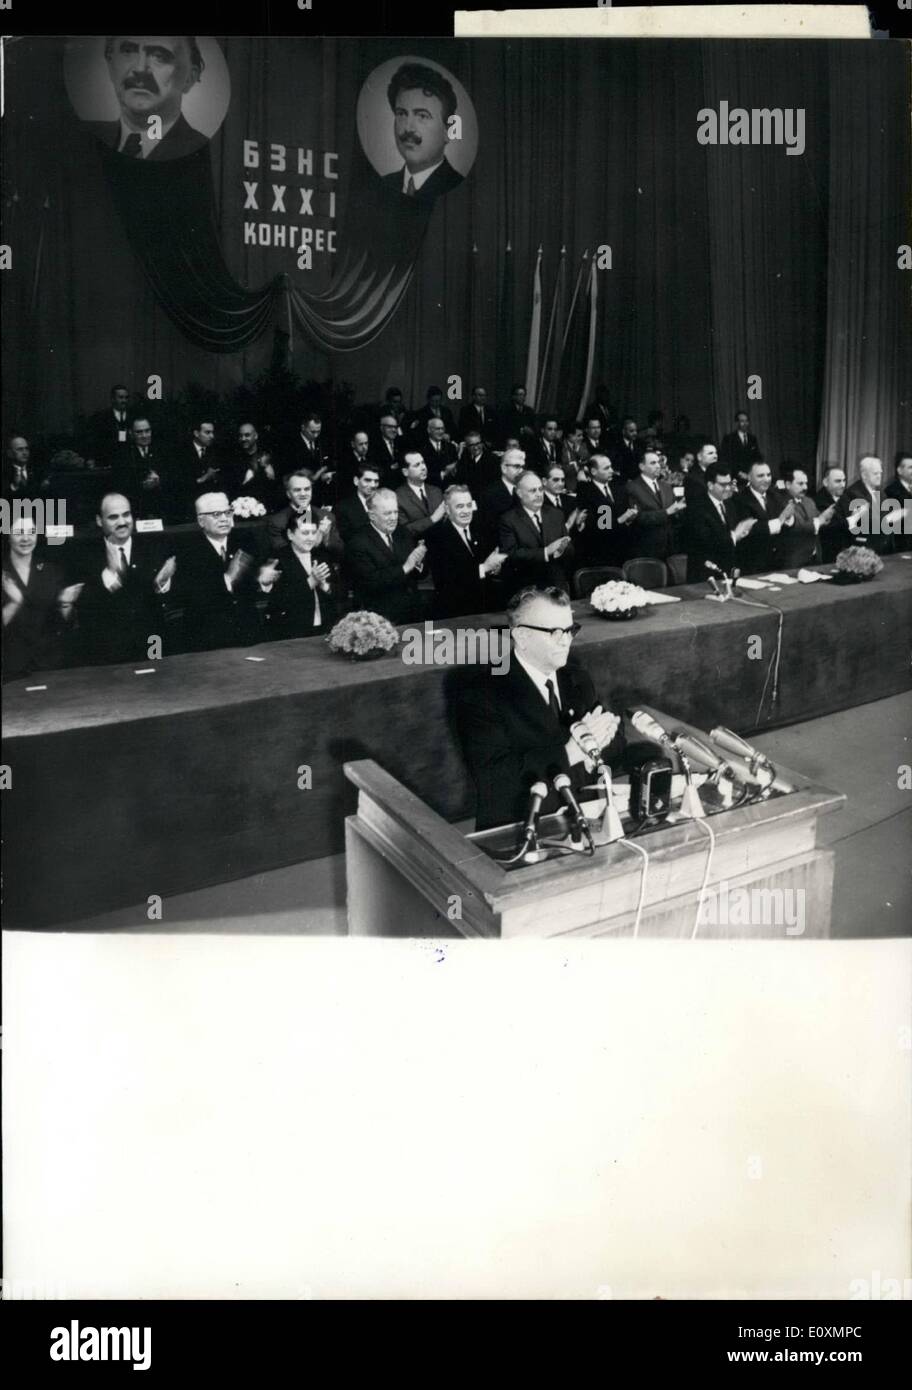 Apr. 04, 1967 - 31st Congress of the Bulgarian Agrarian people's union in Sofia: On April 24th in 1967 Sofia was opened the 31st Congress of the Bulgarian Agrarian People's Union. Present are delegates of the 120,000members of the Union in Bulgaria and 27 delegation from the paysants parties in Europe, Asia, Africa and South America. View of the Presidium of the Congress during the opening ceremony. Speaking is Georgi Traikov secretary of the Union. Stock Photo